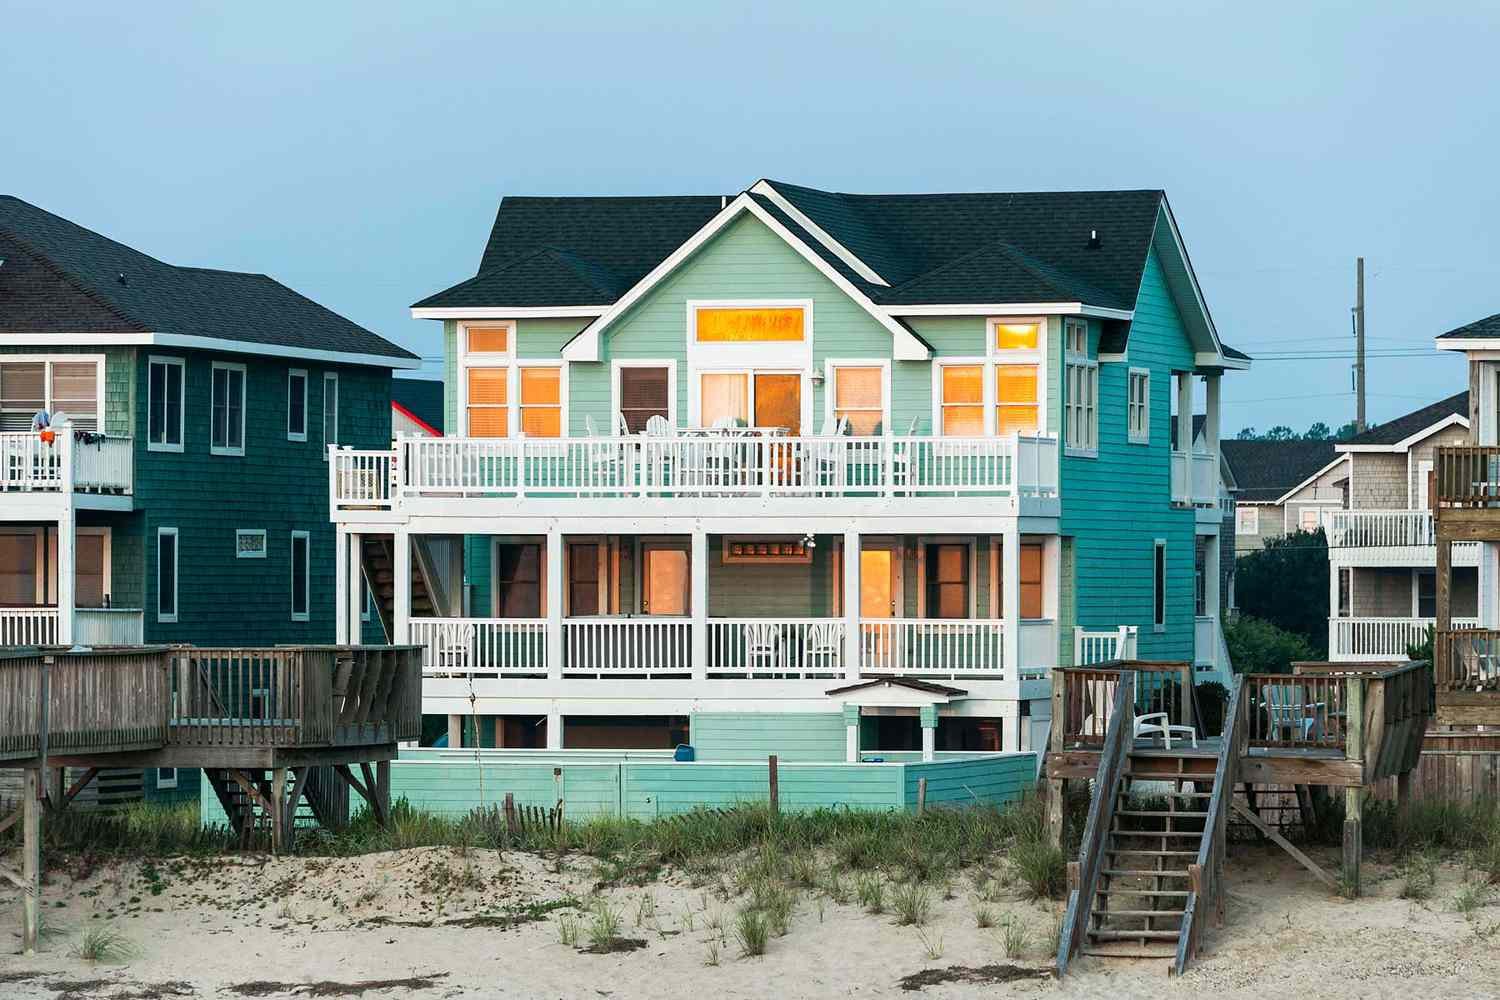 12 Mistakes to Avoid When Renting a Vacation Home, According to Experts